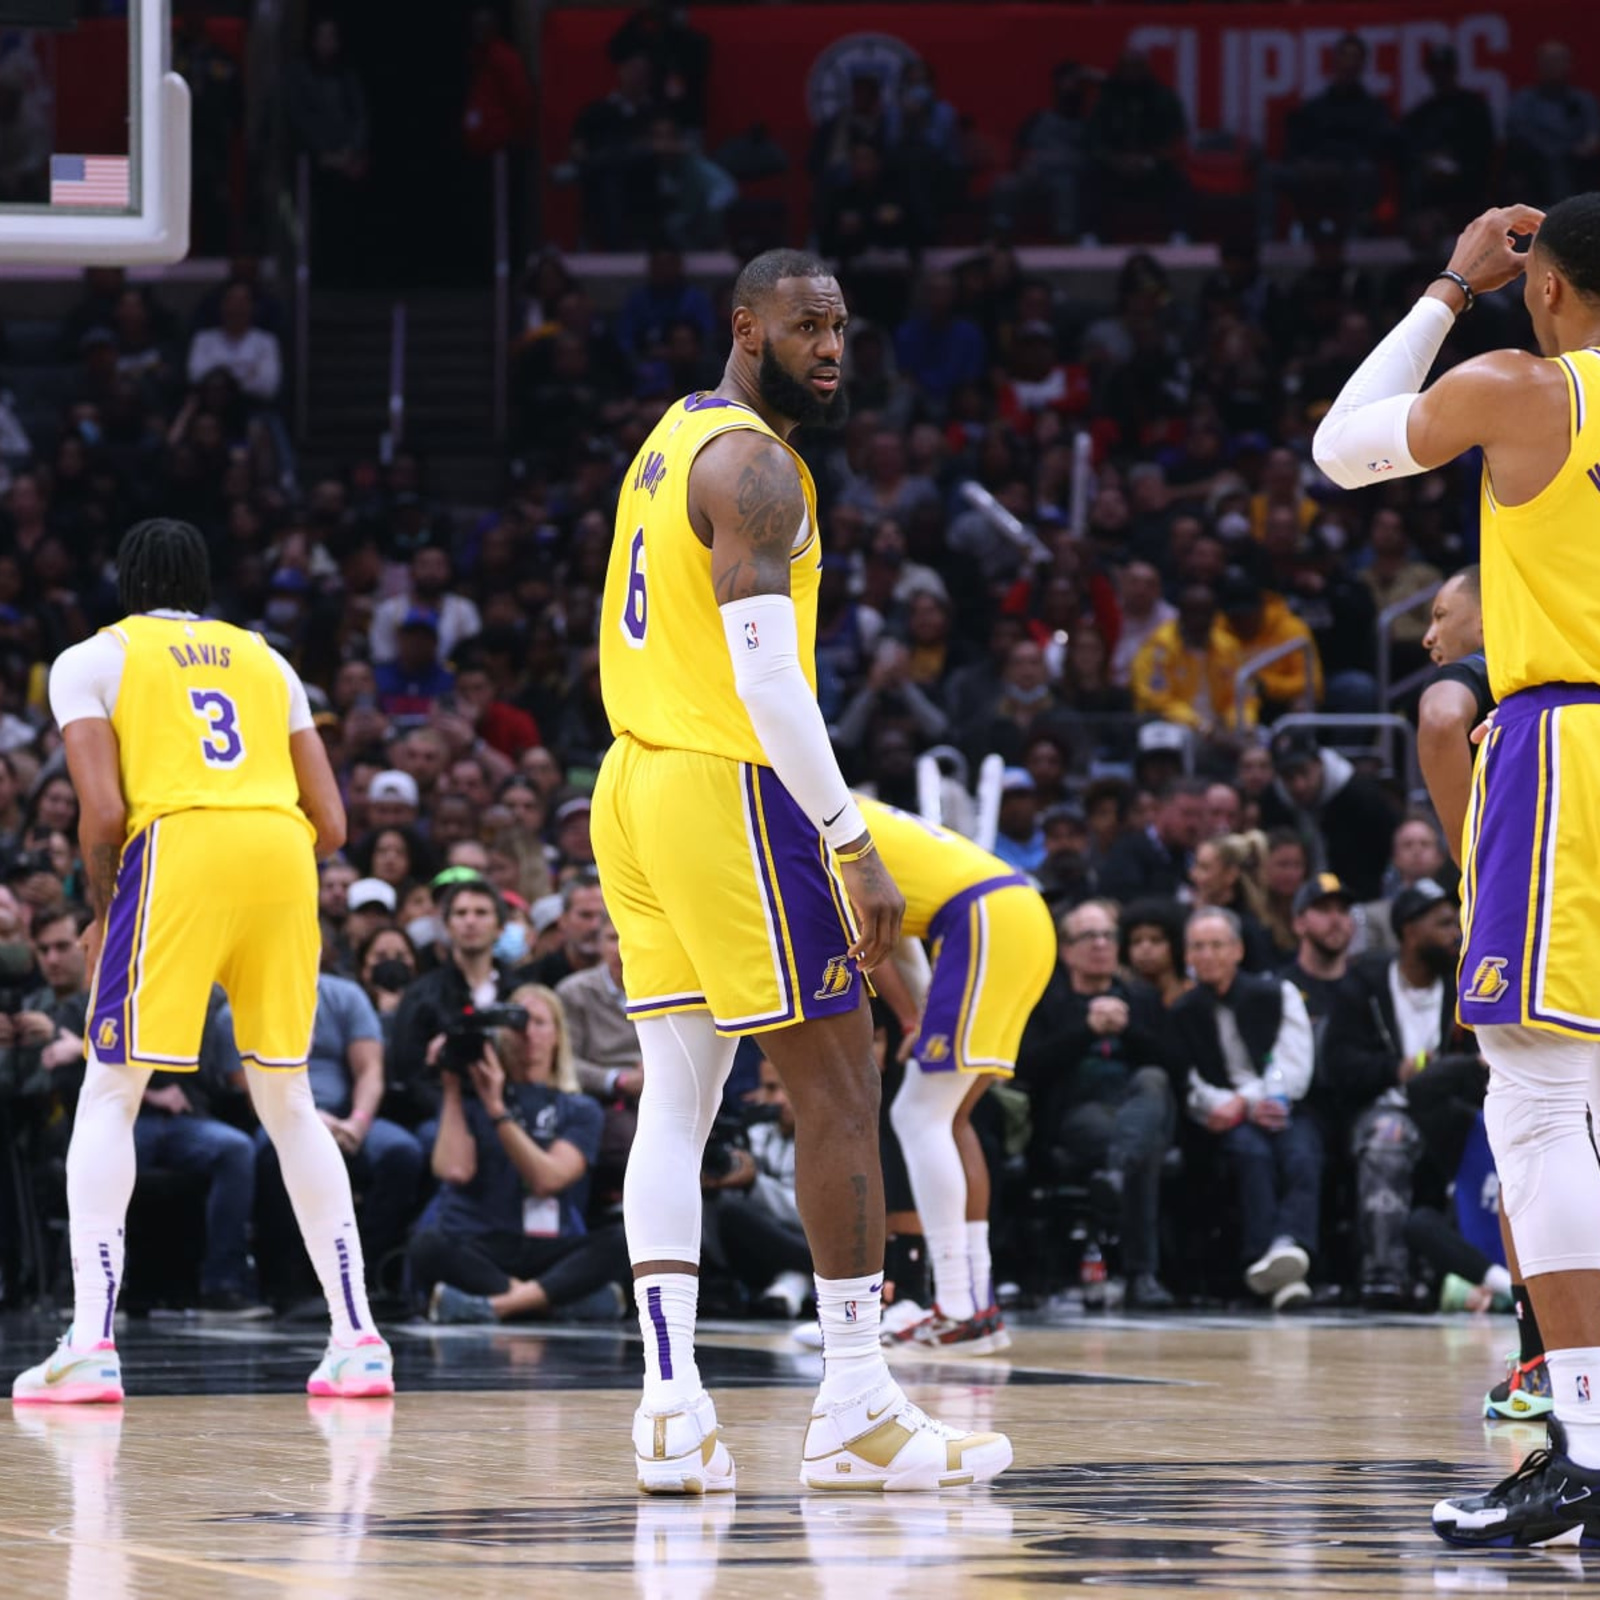 Lakers injury update: LA to be without key role player for road trip